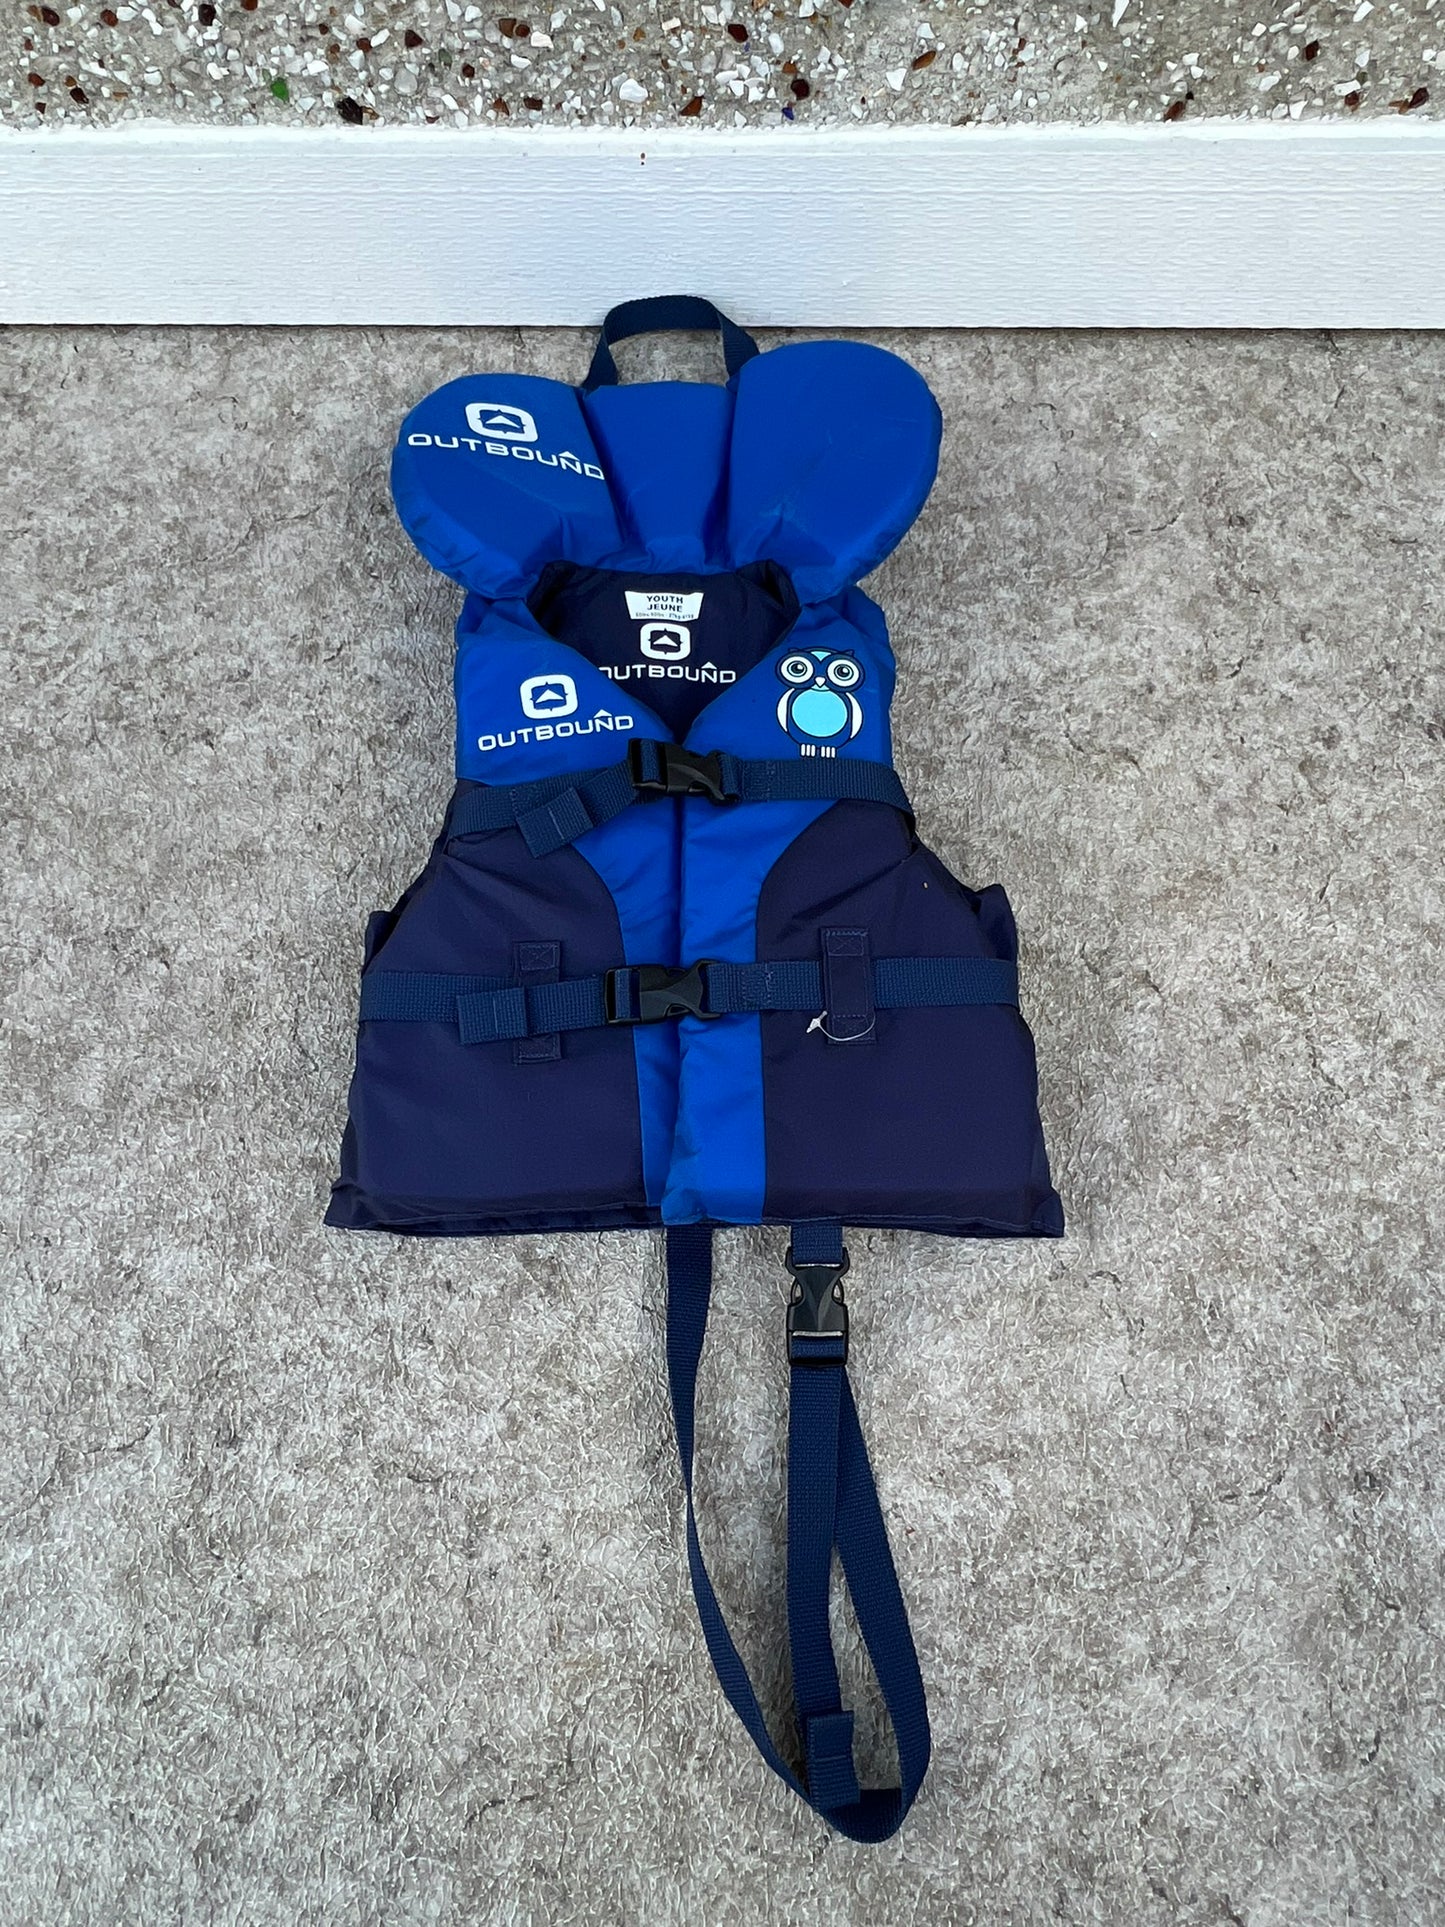 Life Jacket Child Size 60-90 Youth Outbound Blue Blue With Crotch Strap New Demo